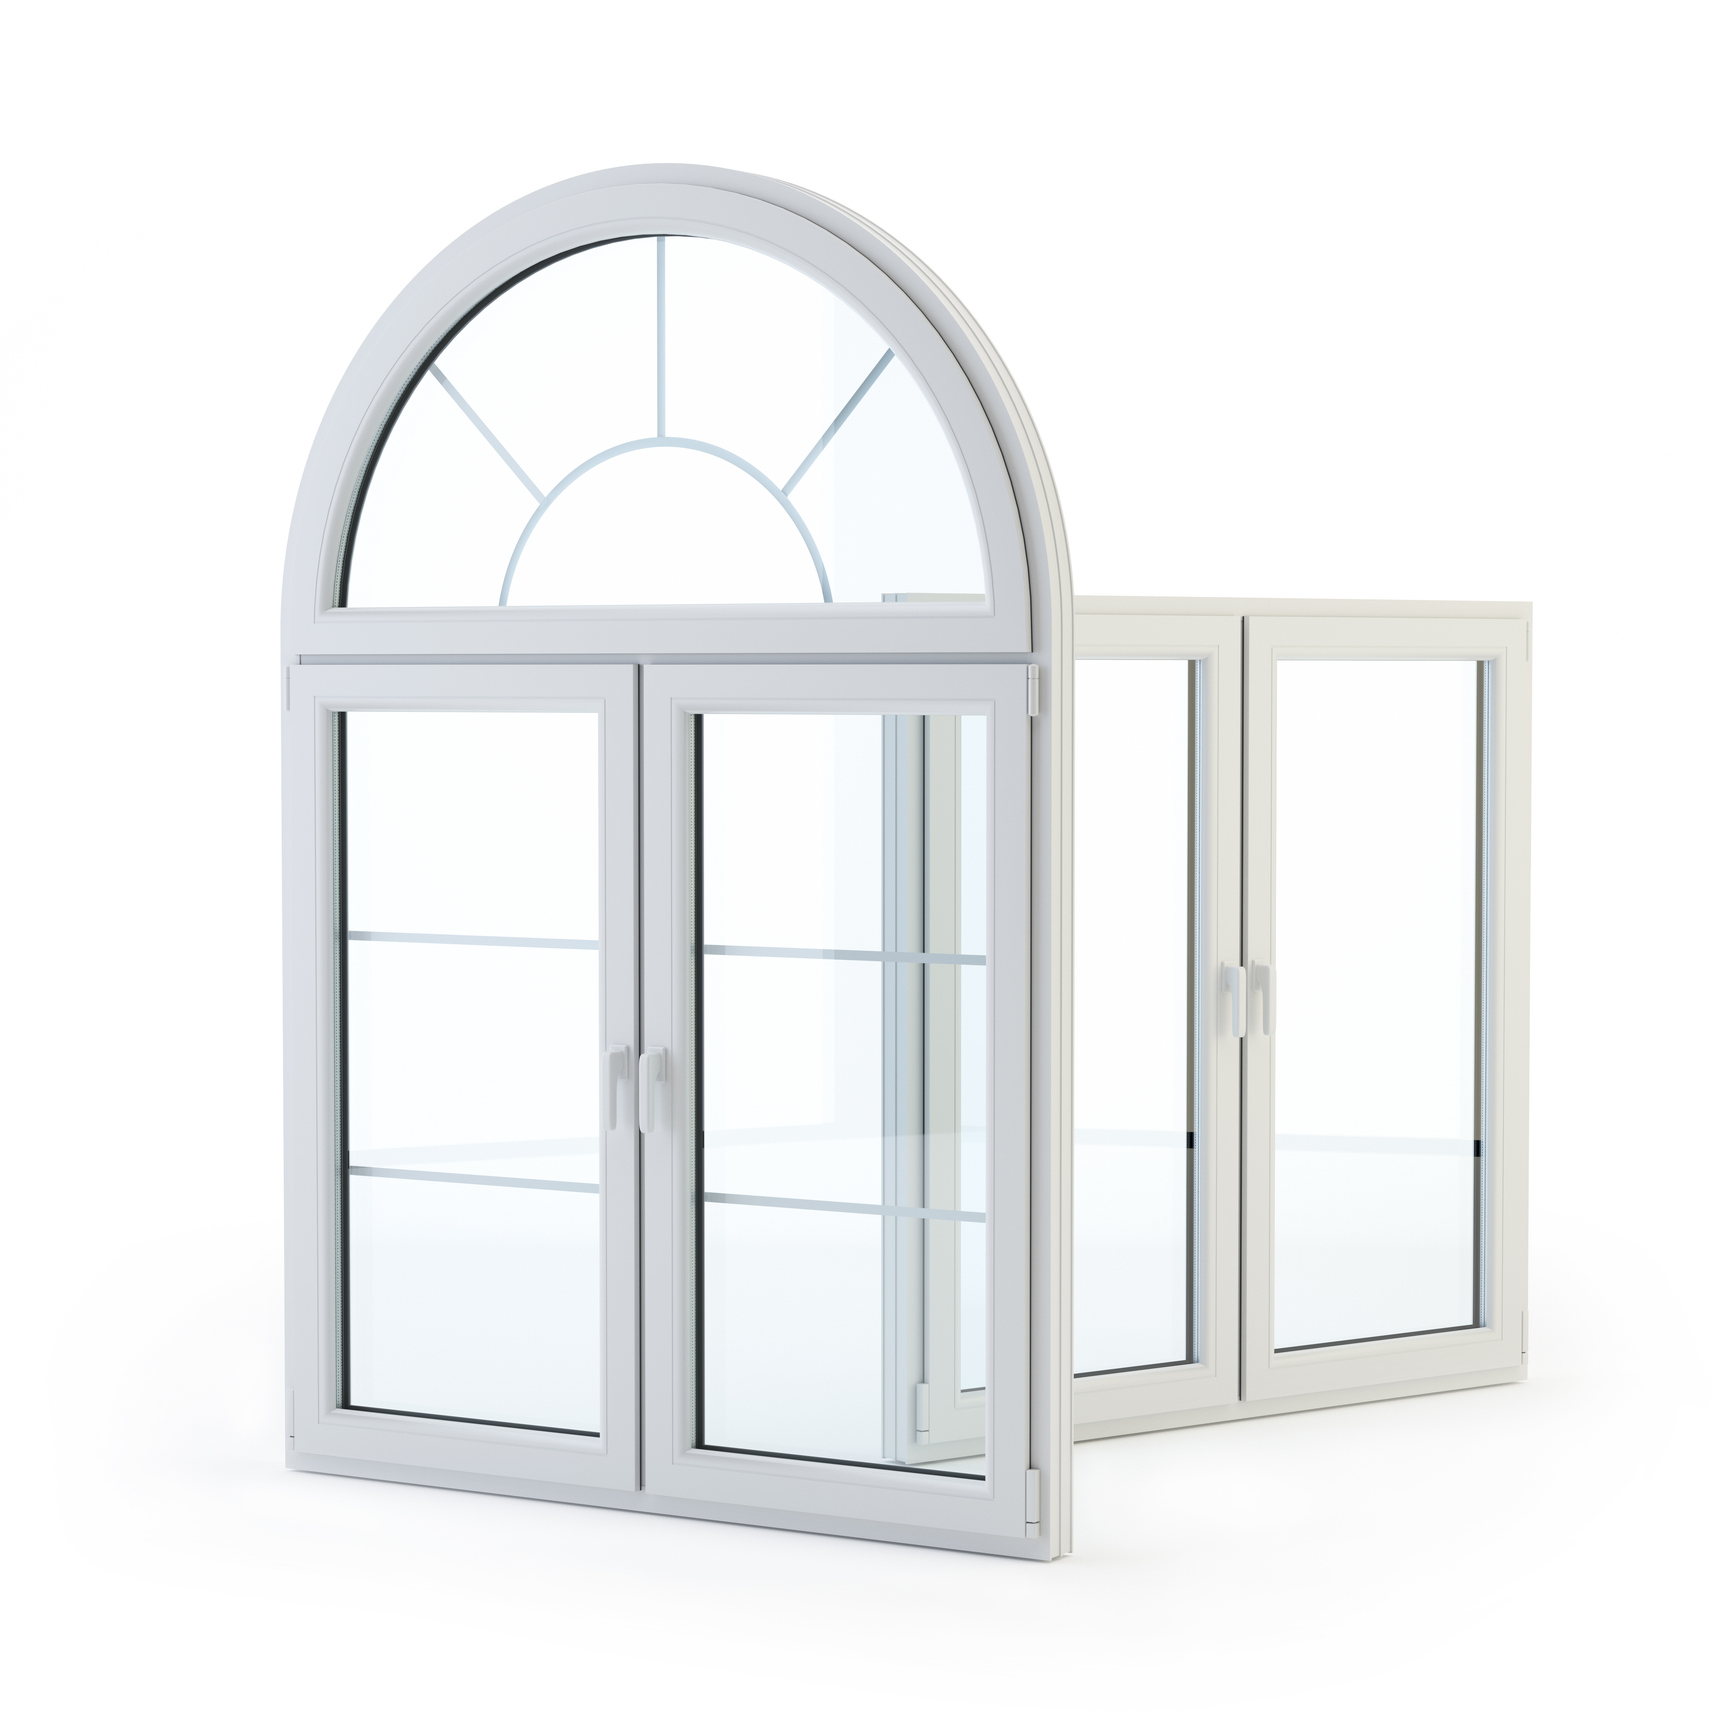 Stock photo of custom window designs on a white background. 